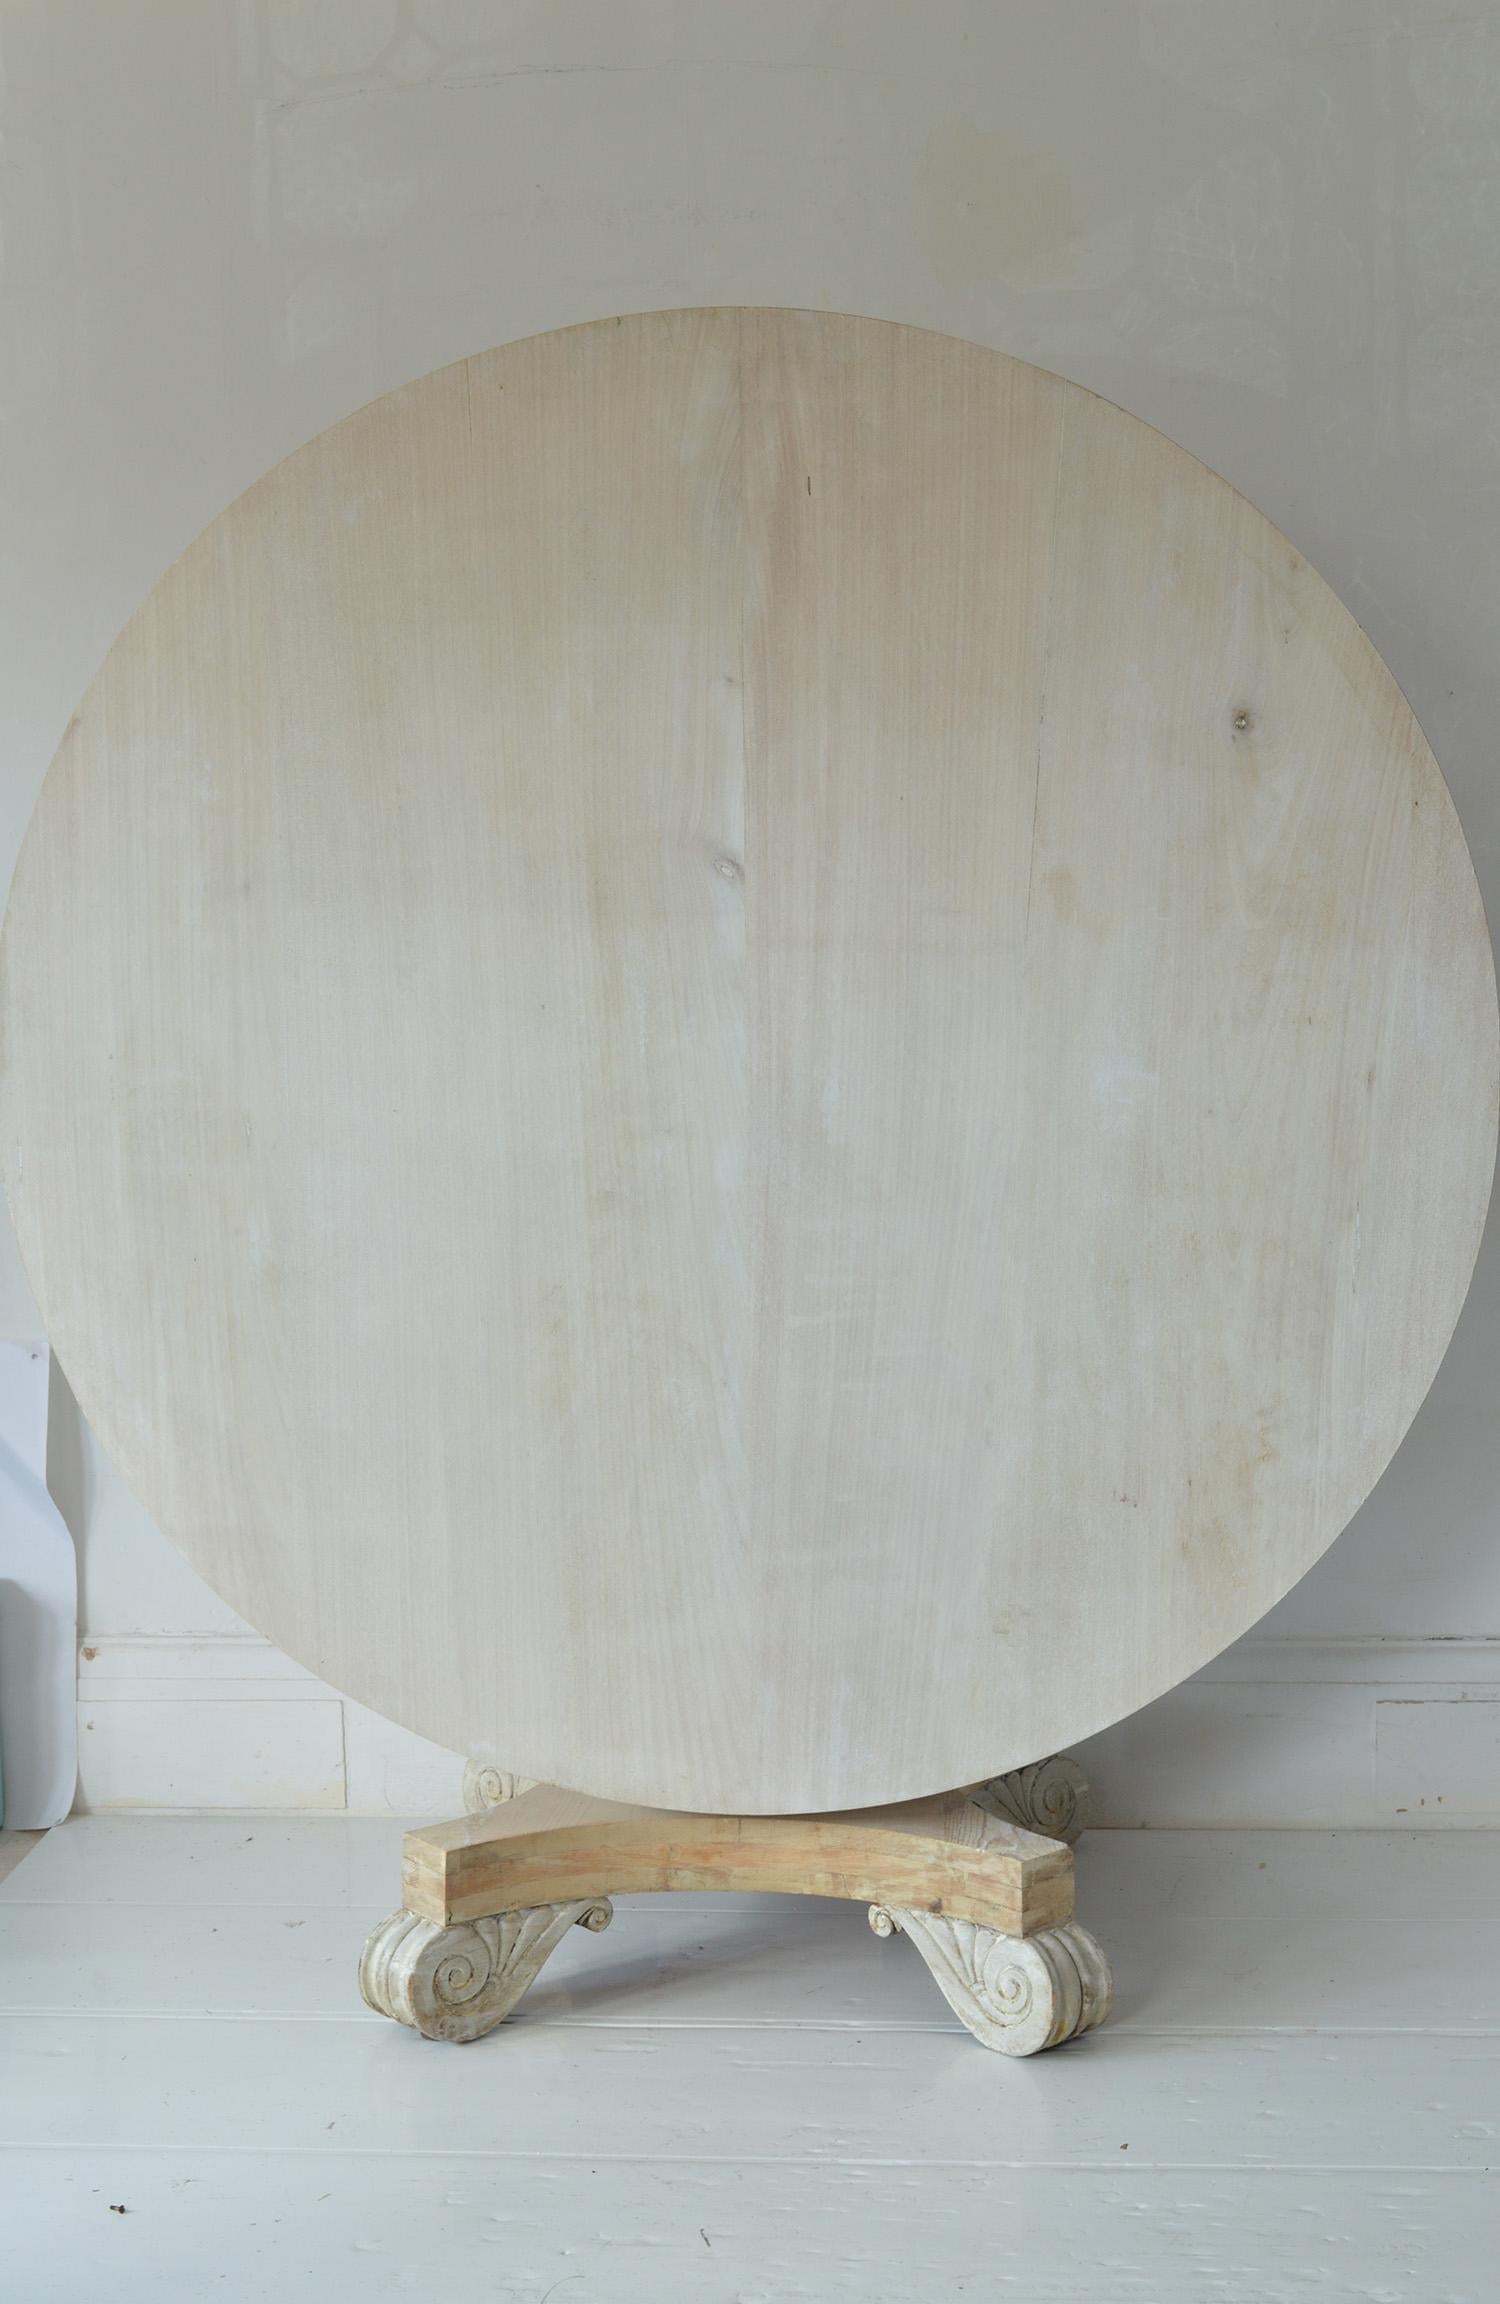 Early 19th Century Large Antique Round Bleached Pine and Mahogany Table, English, circa 1830